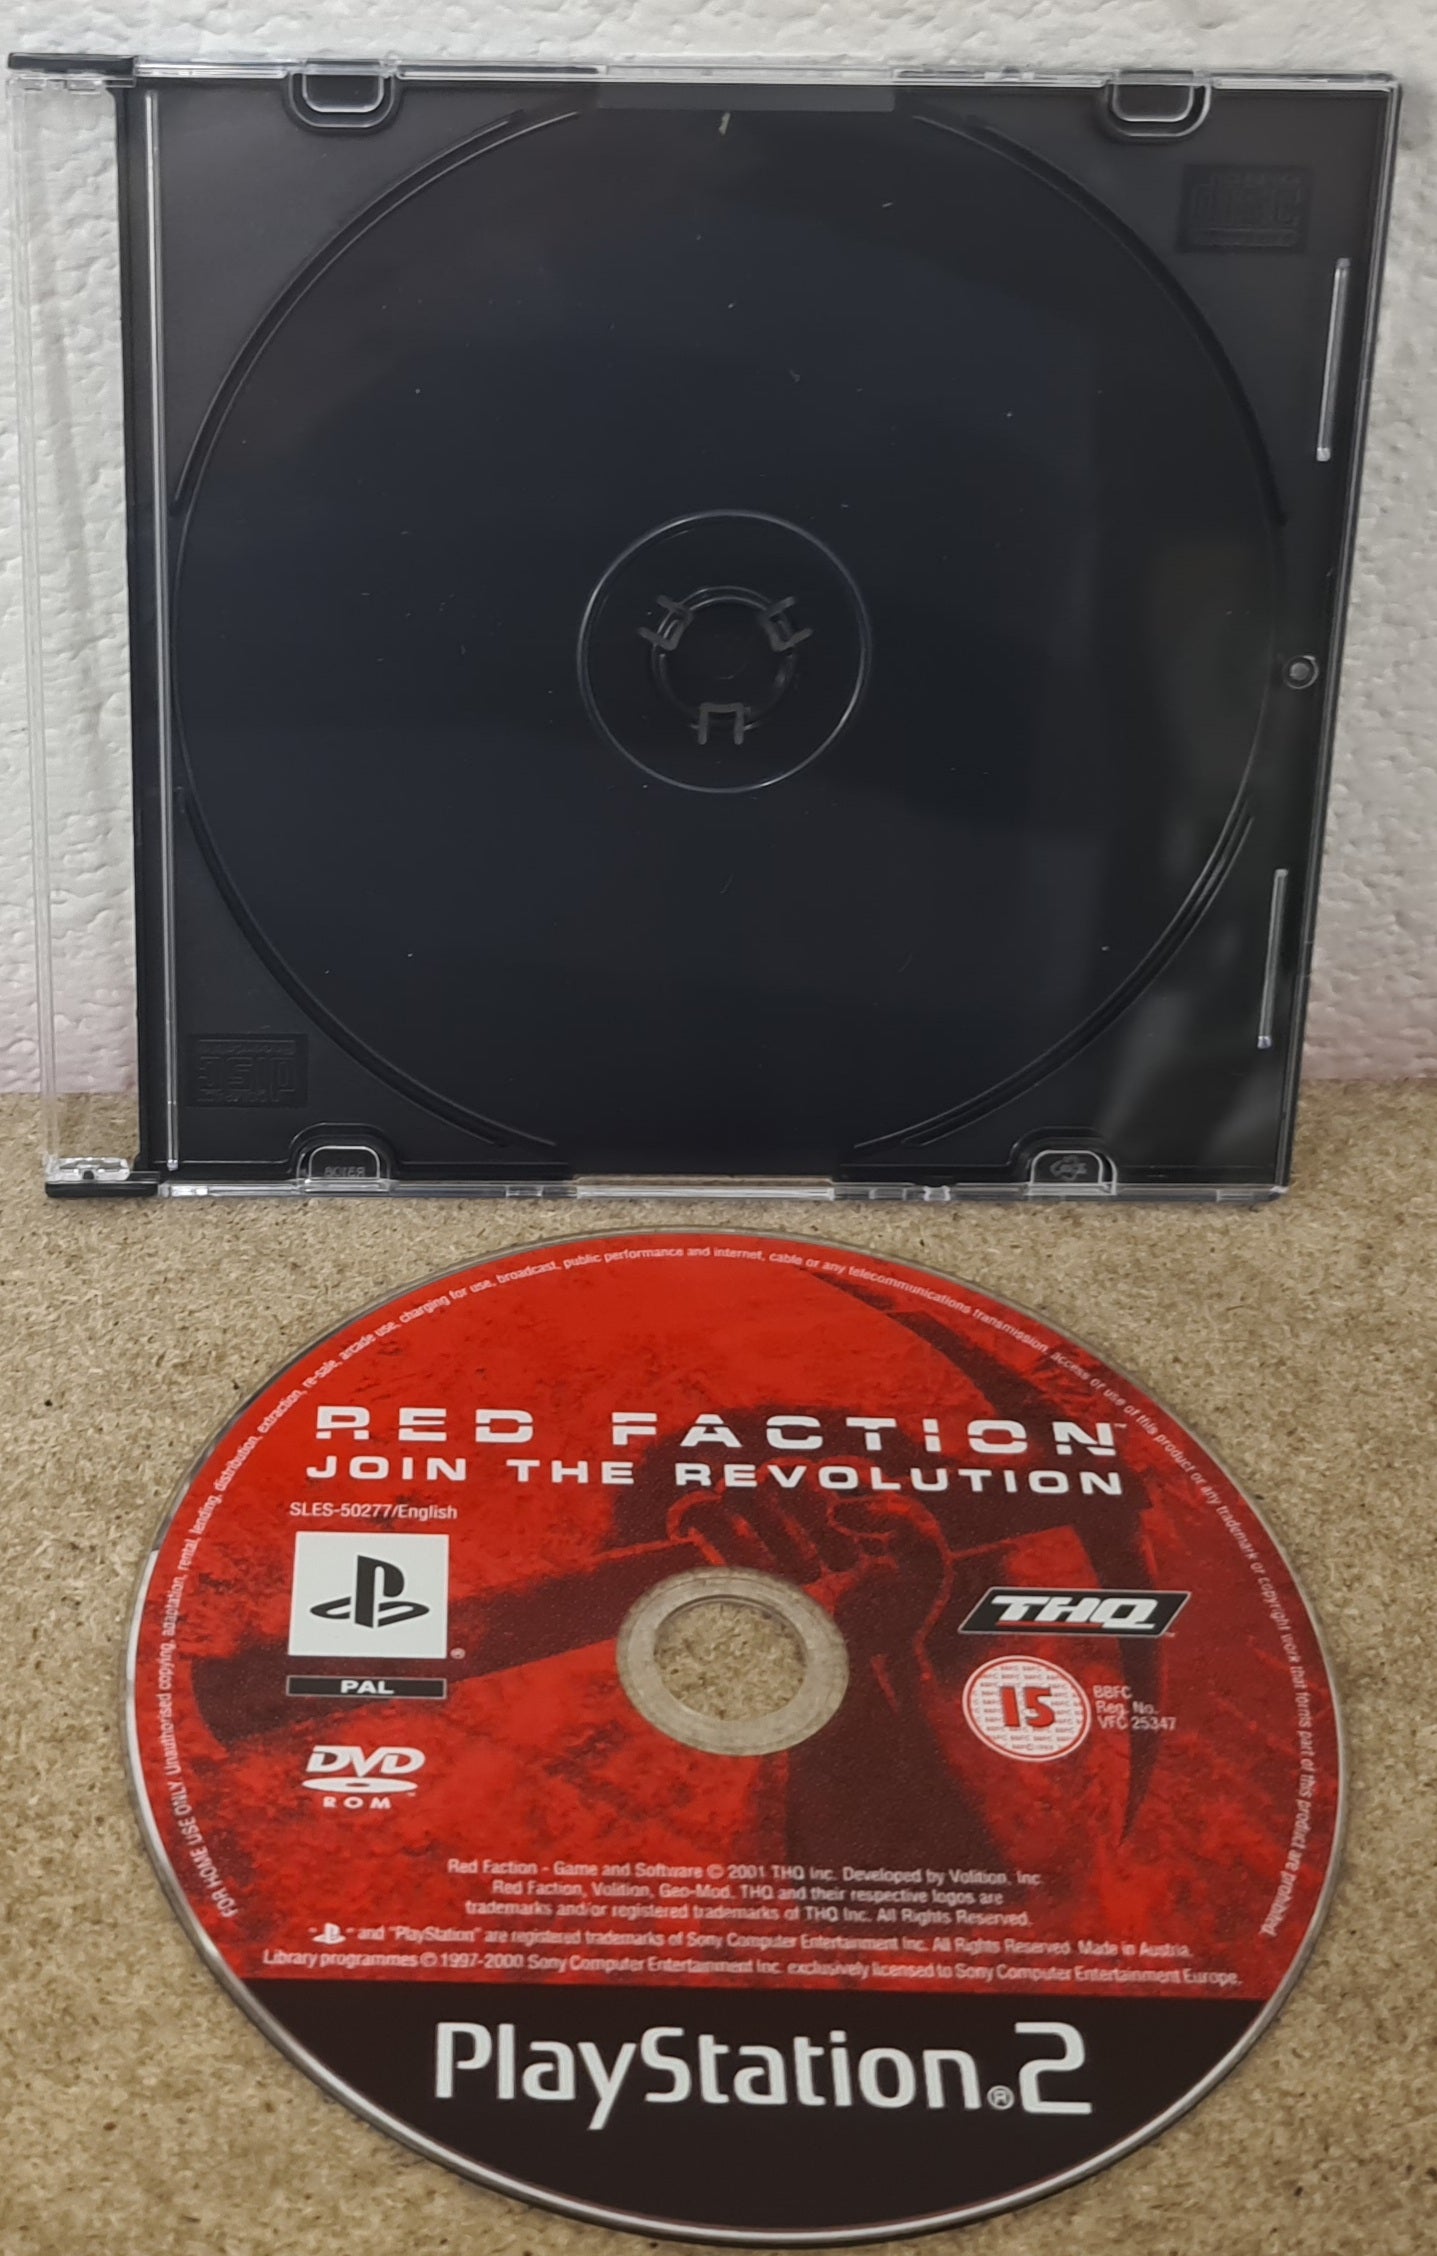 Red Faction Sony Playstation 2 (PS2) Game Disc Only